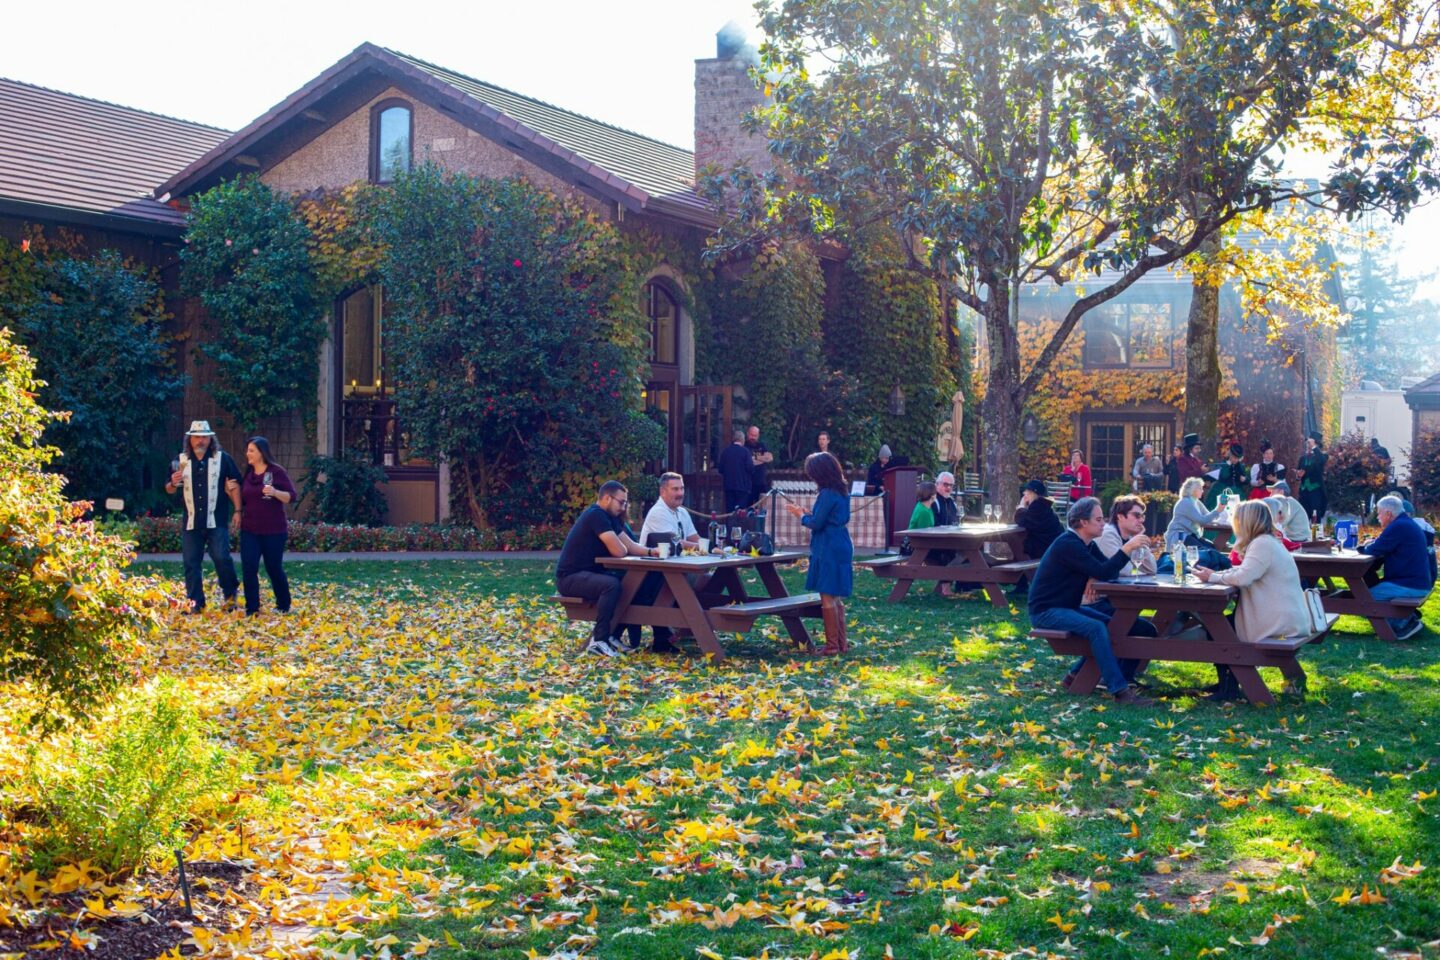 People enjoy an outdoor picnic area at Dry Creek Vineyard in the fall